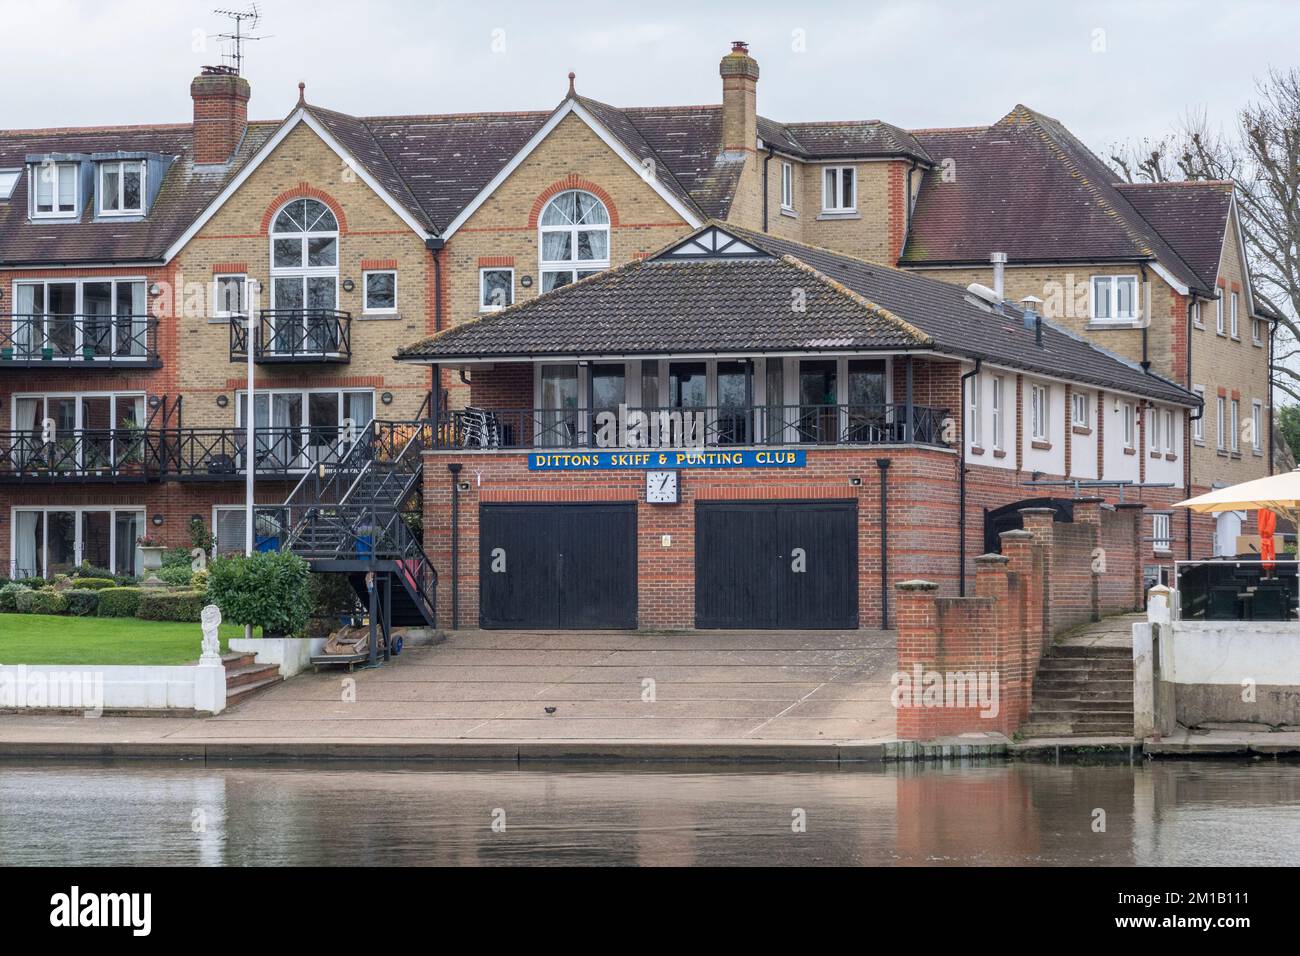 The Dittons Skiff & Punting Club beside the River Thames, London, UK. Stock Photo